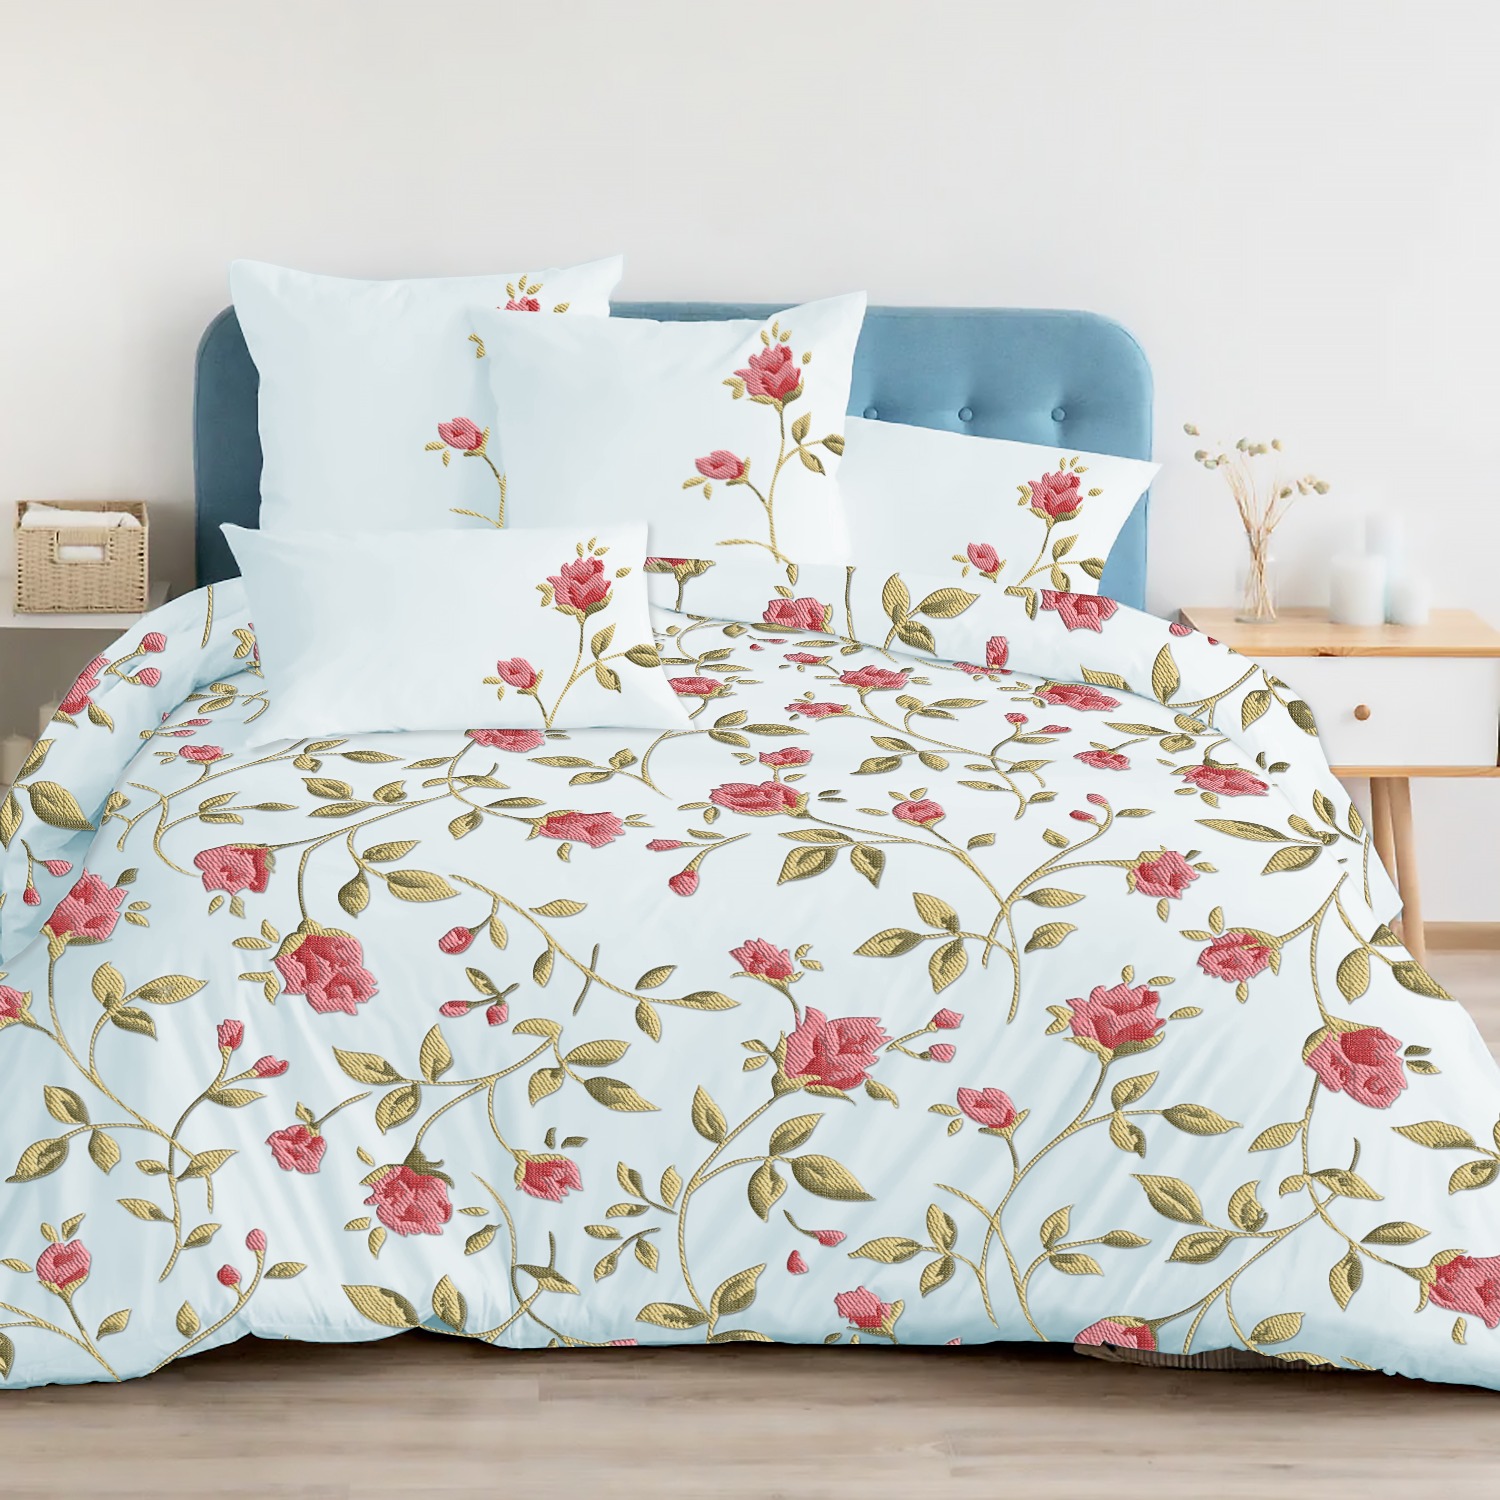 Looking for Floral Bedding? Explore Your Options with This Guide to Find Your Perfect Petal Power